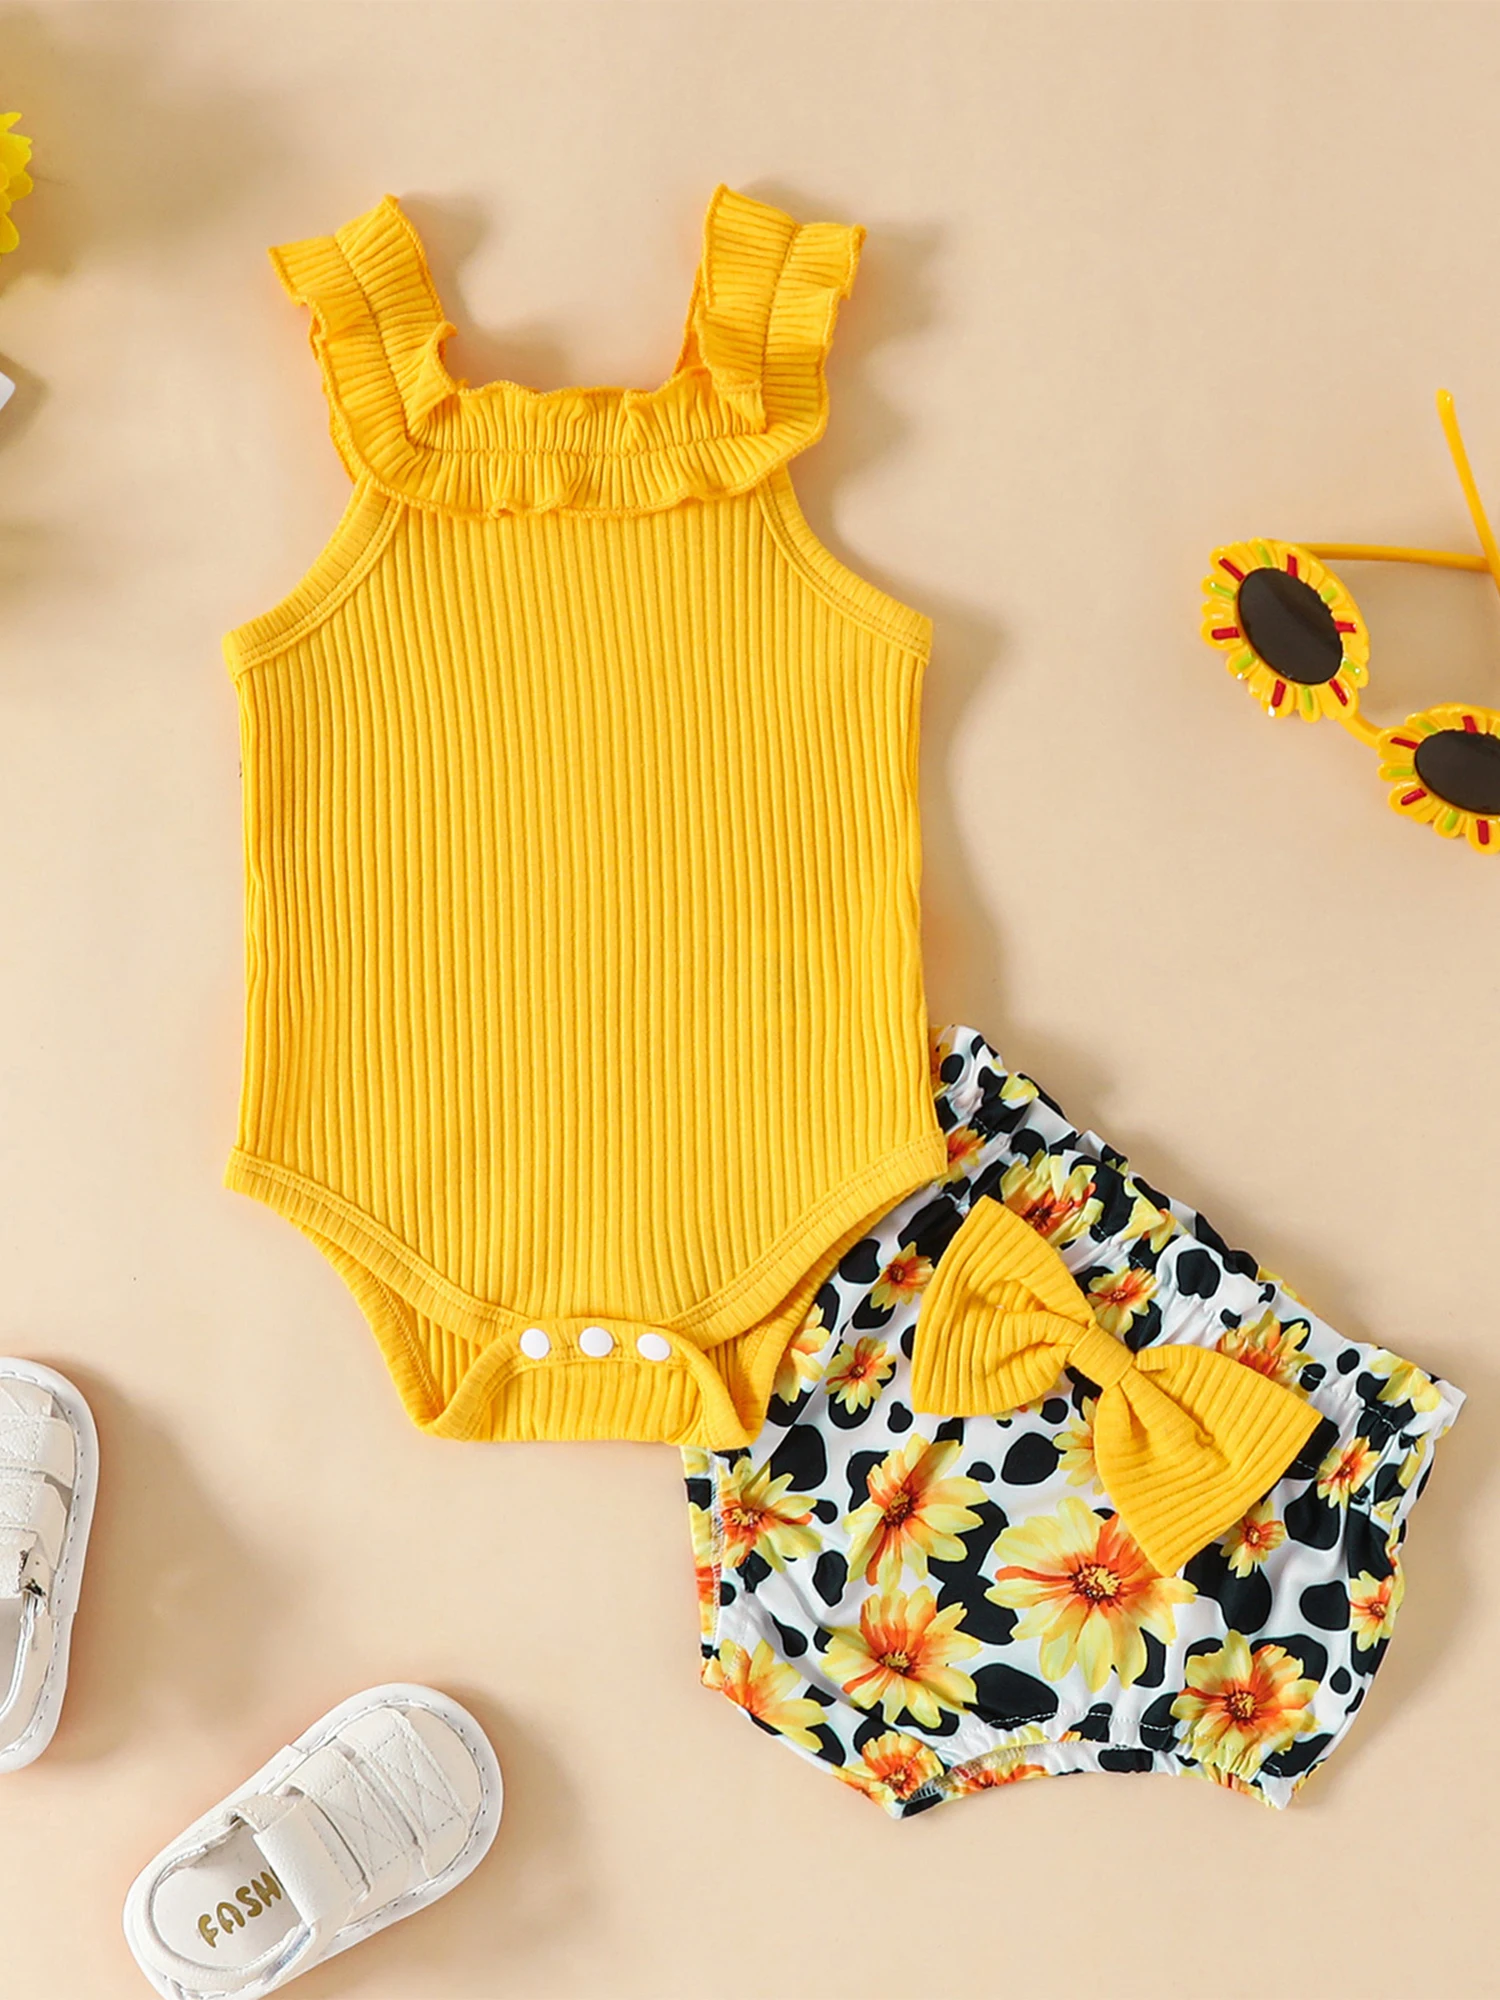 

Newborn Baby Girl Summer Outfit Sleeveless Ribbed Soild Color Romper Rainbow Shorts with Headband Set (Yellow Flower 6-9 Months)